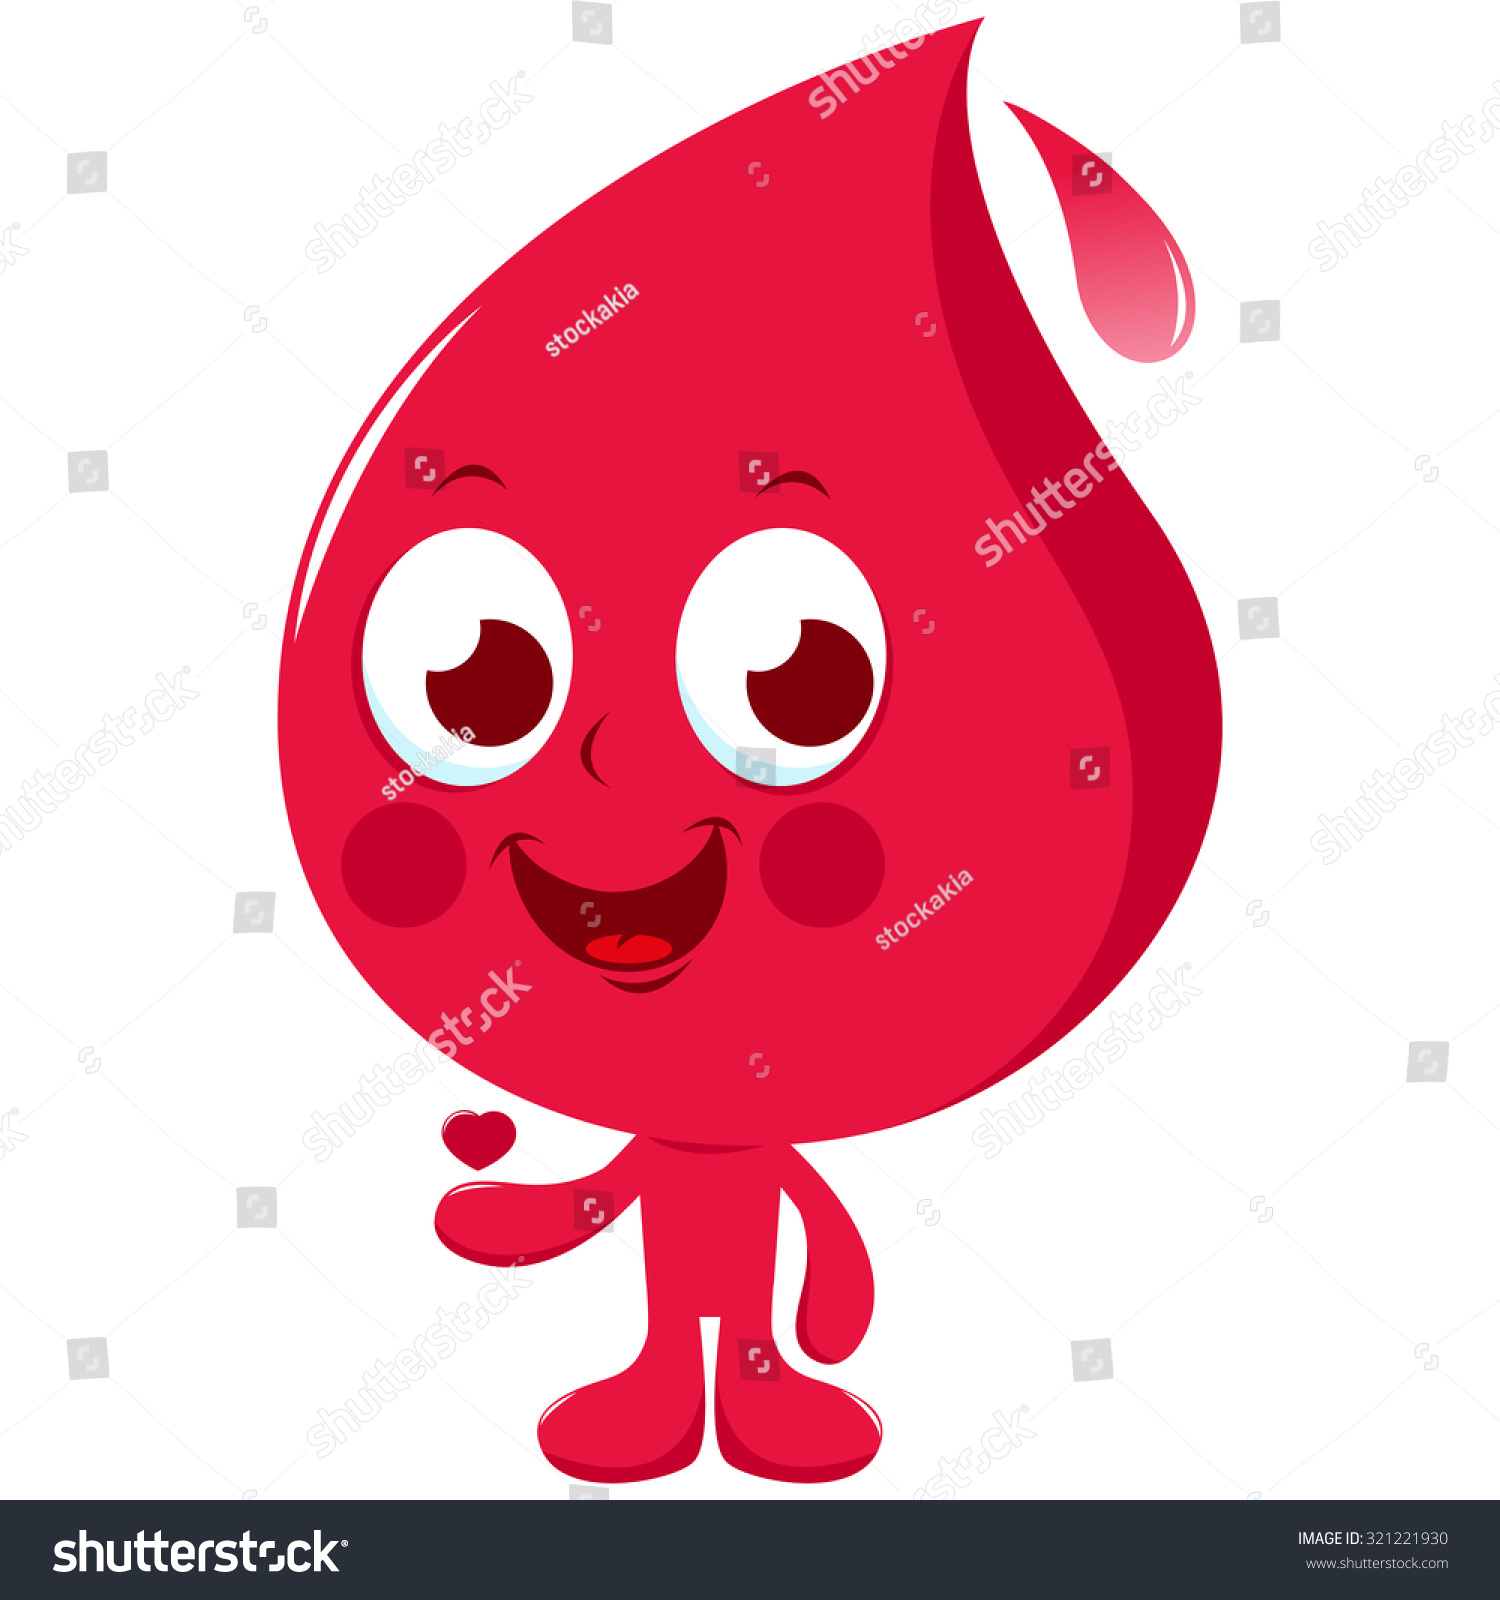 blood type clipart - photo #26